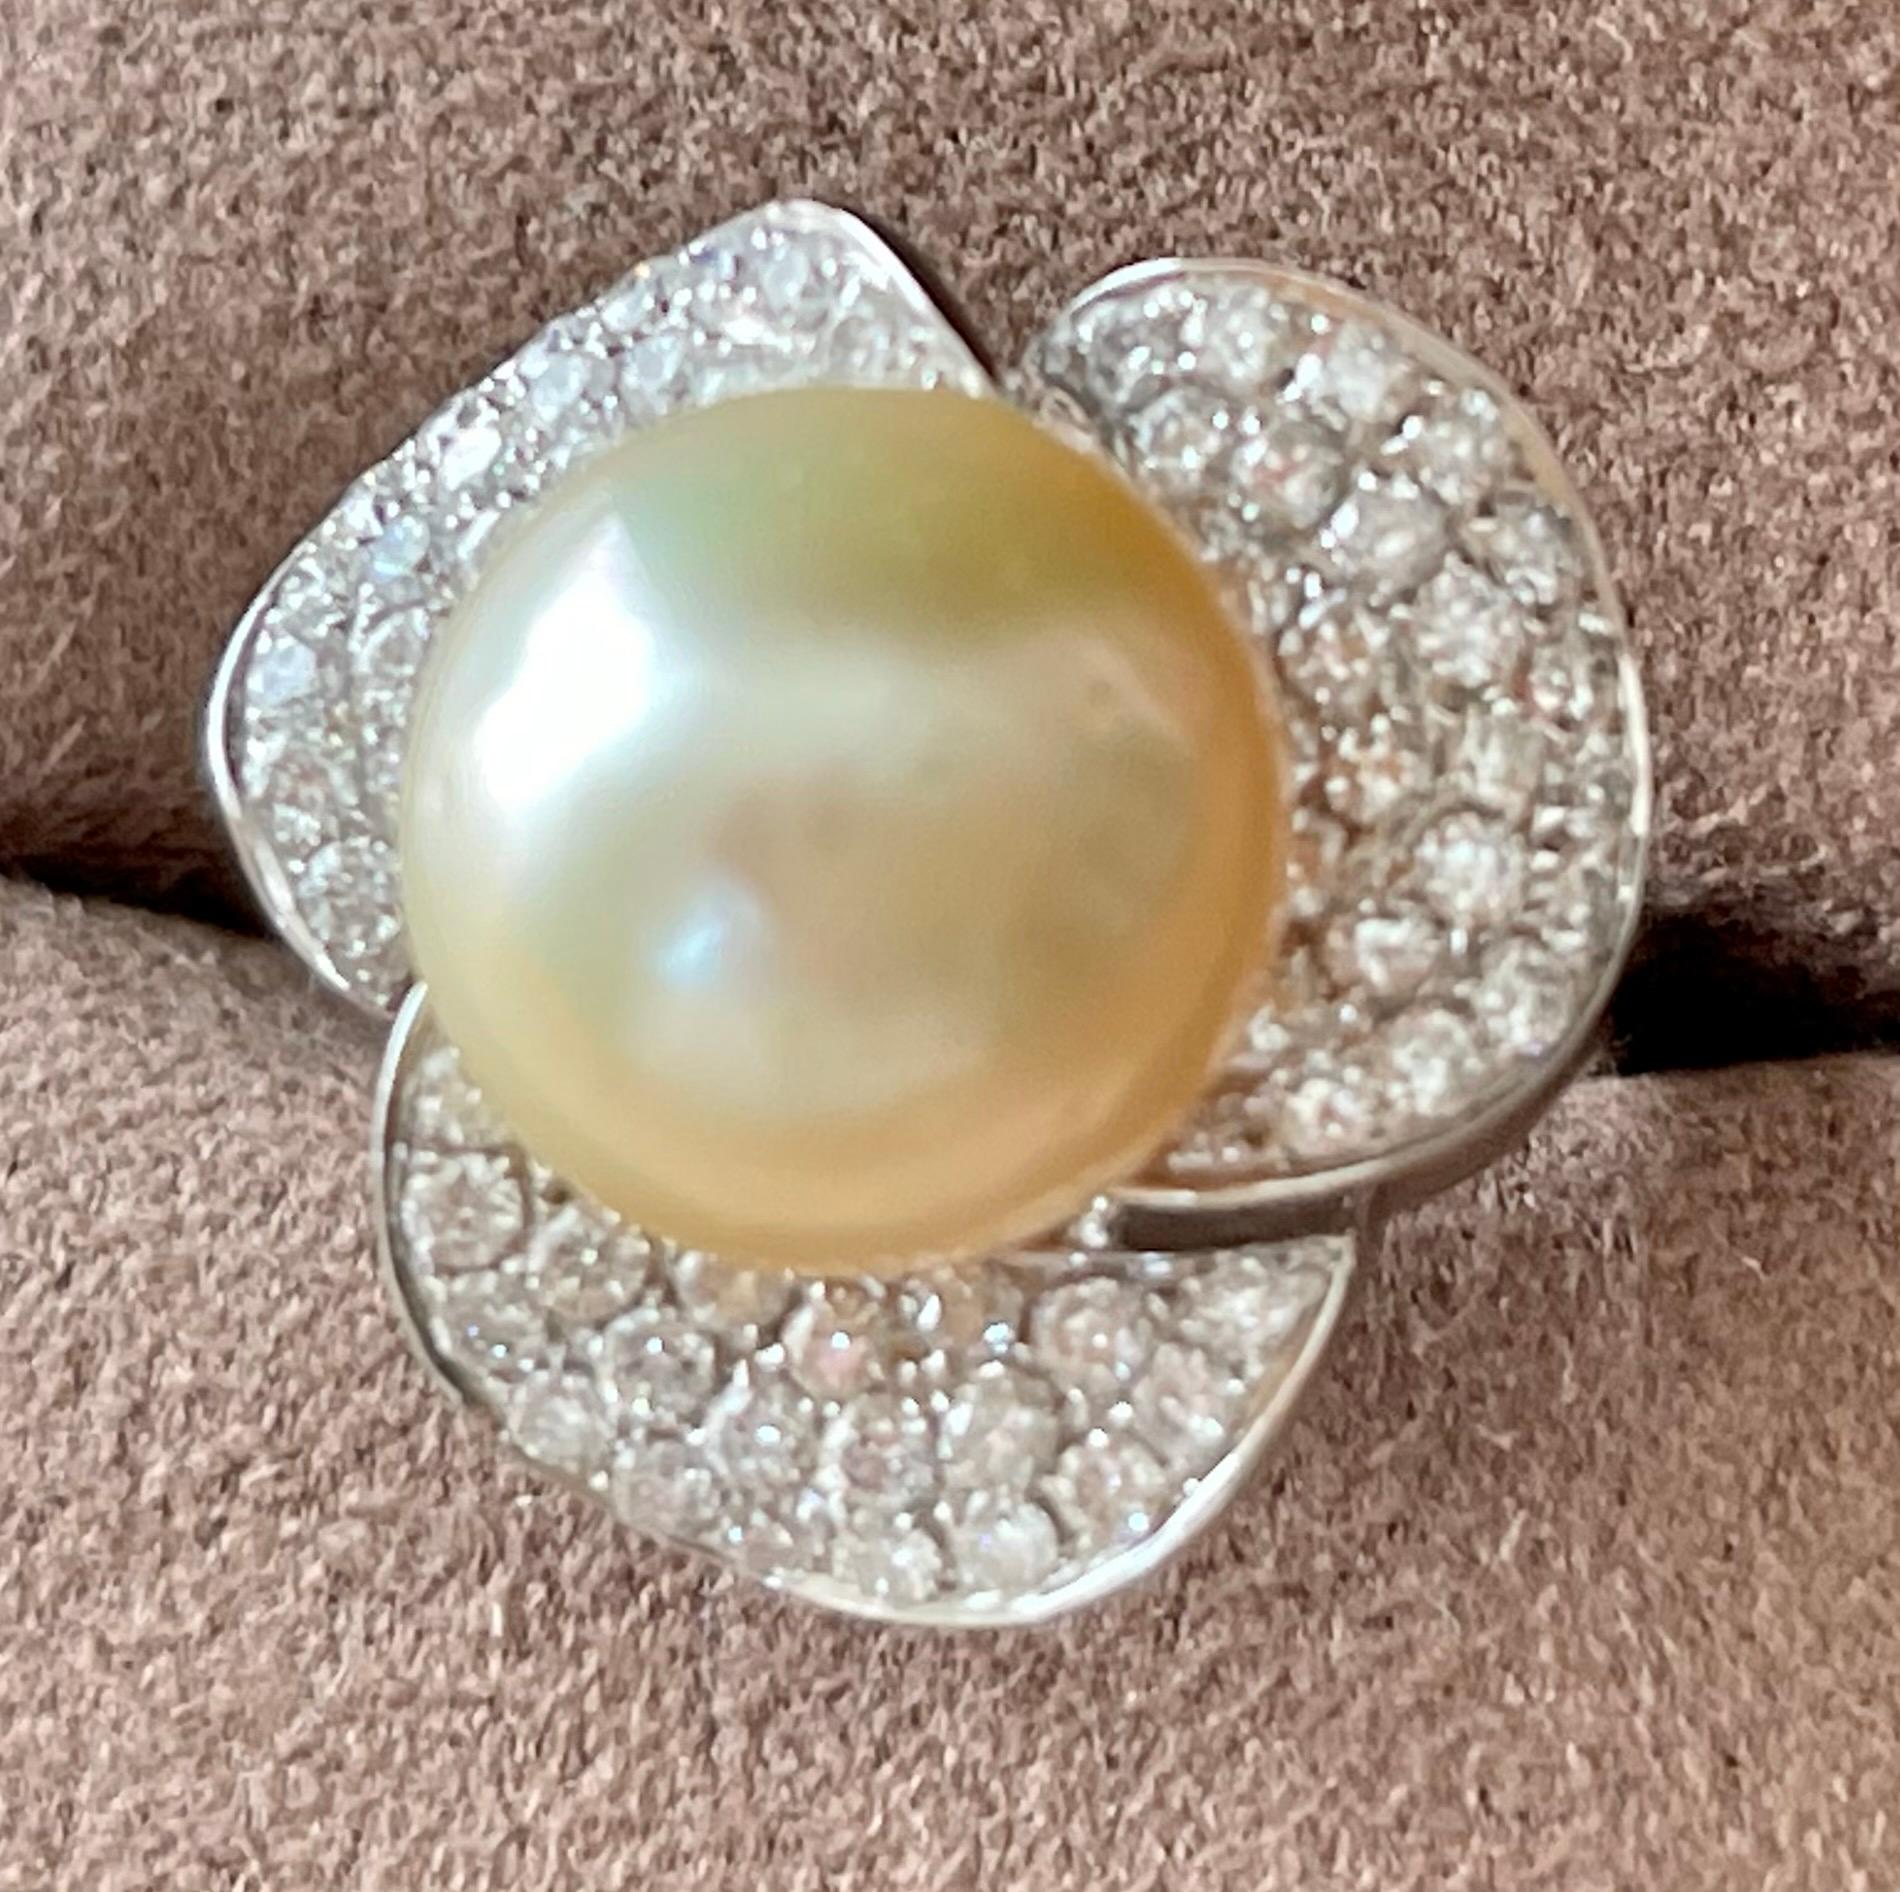 Elegant 18 K white Gold Ring featuring a cream colored South Sea Pearl with a slightly golden overtone surrounded by pave set petals. 73 brillinat cut Diamonds weighing 1.64 ct. Diammeter of the South Sea Pearl: 13.5mm
The ring is currently size